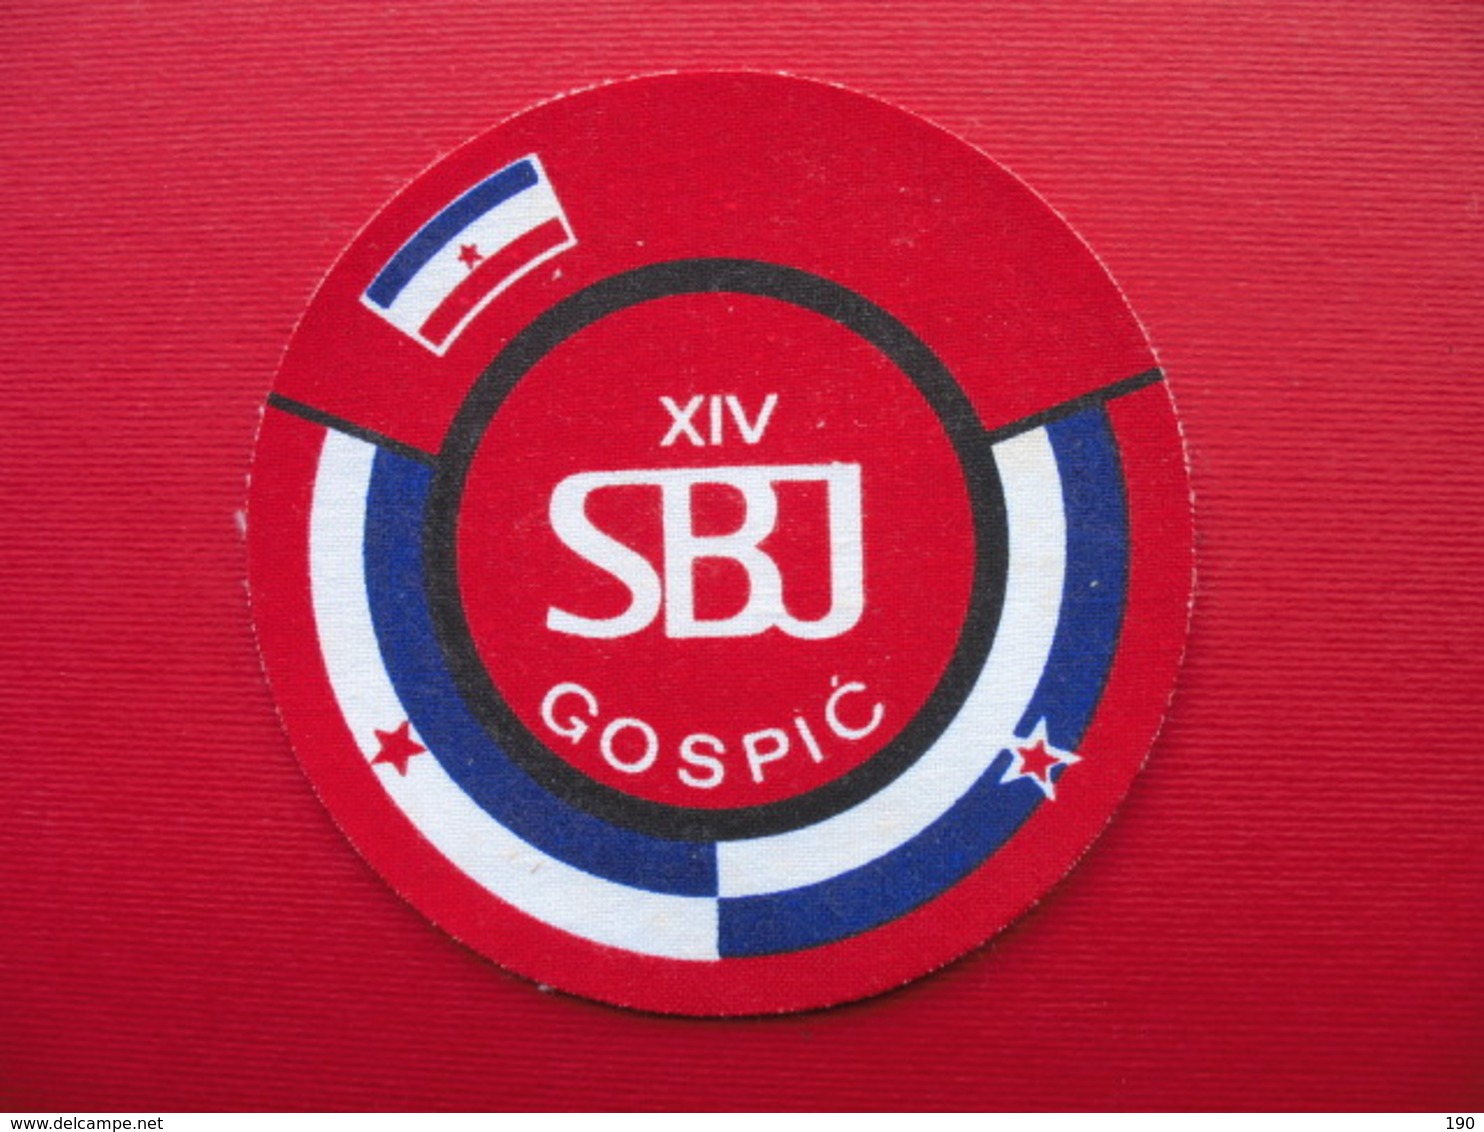 XIV SBJ GOSPIC - Patches